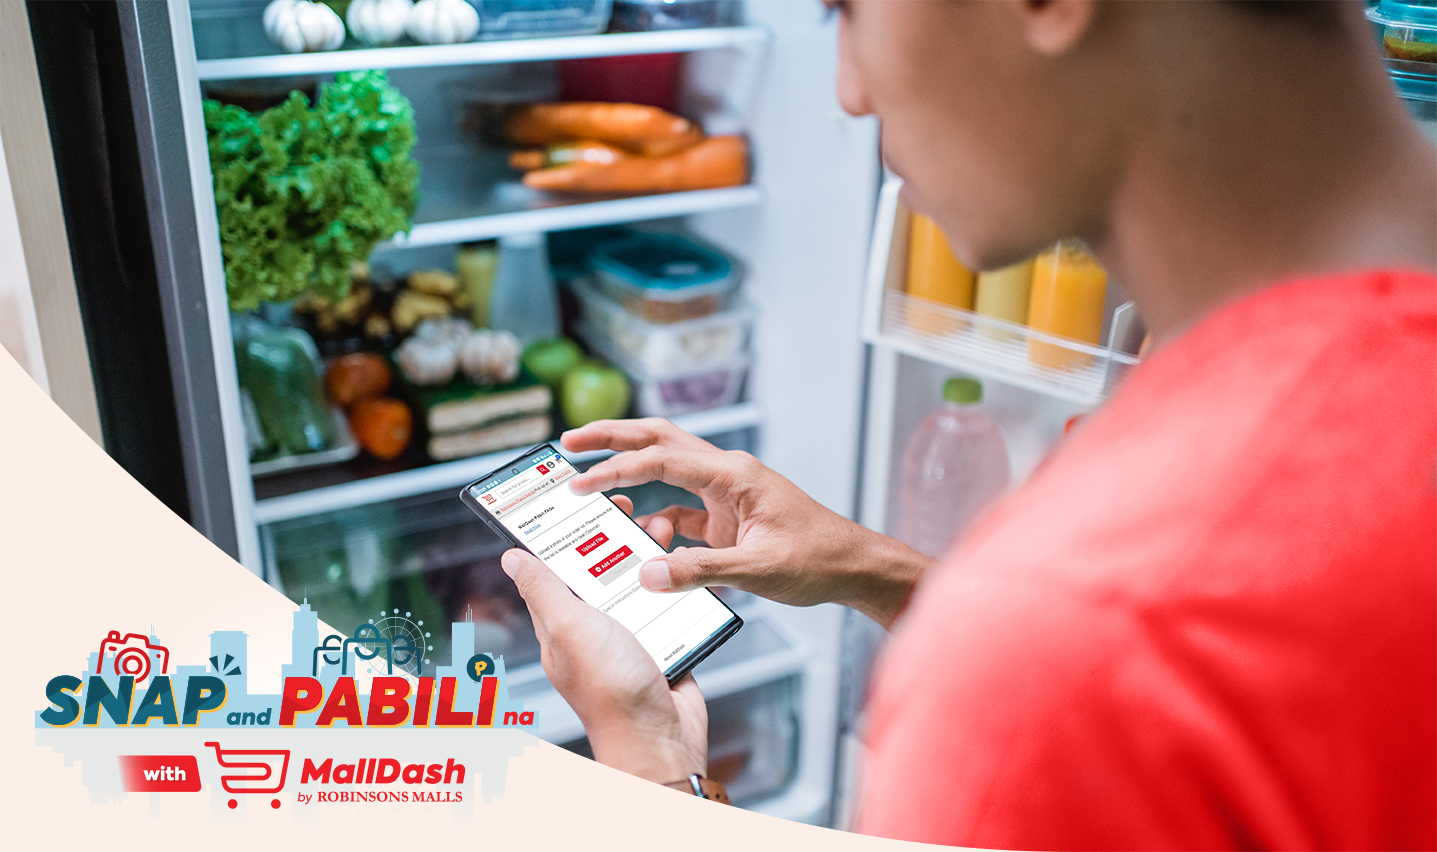 How to Snap and Pabili with MallDash